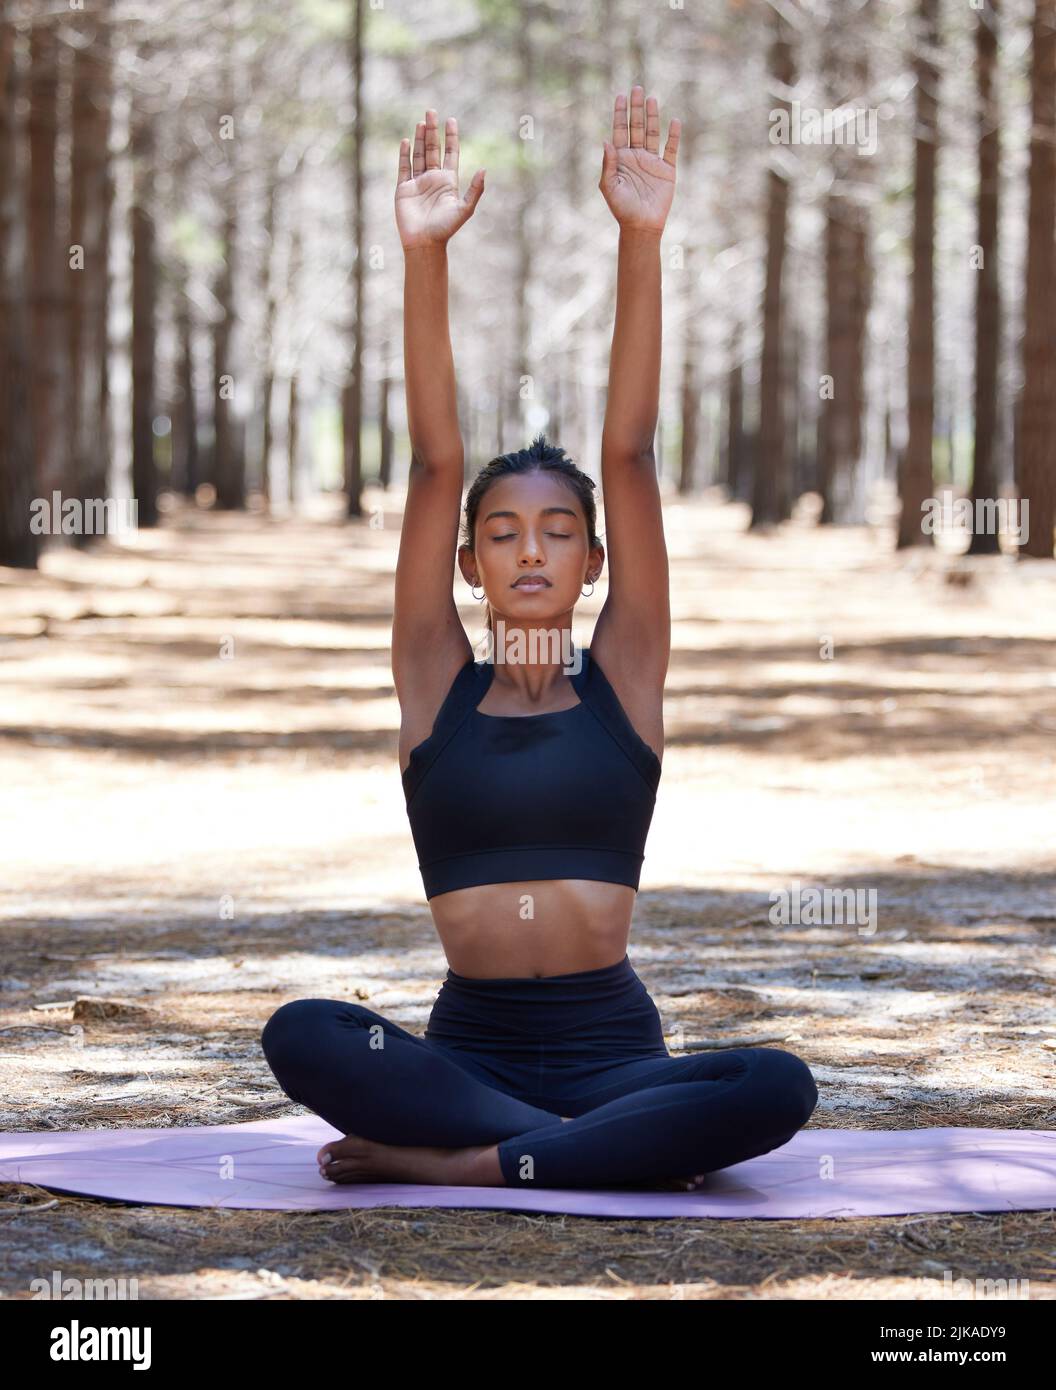 Gathering good energy from the universe. an attractive young woman sitting  alone on a yoga mat outdoors and meditating Stock Photo - Alamy